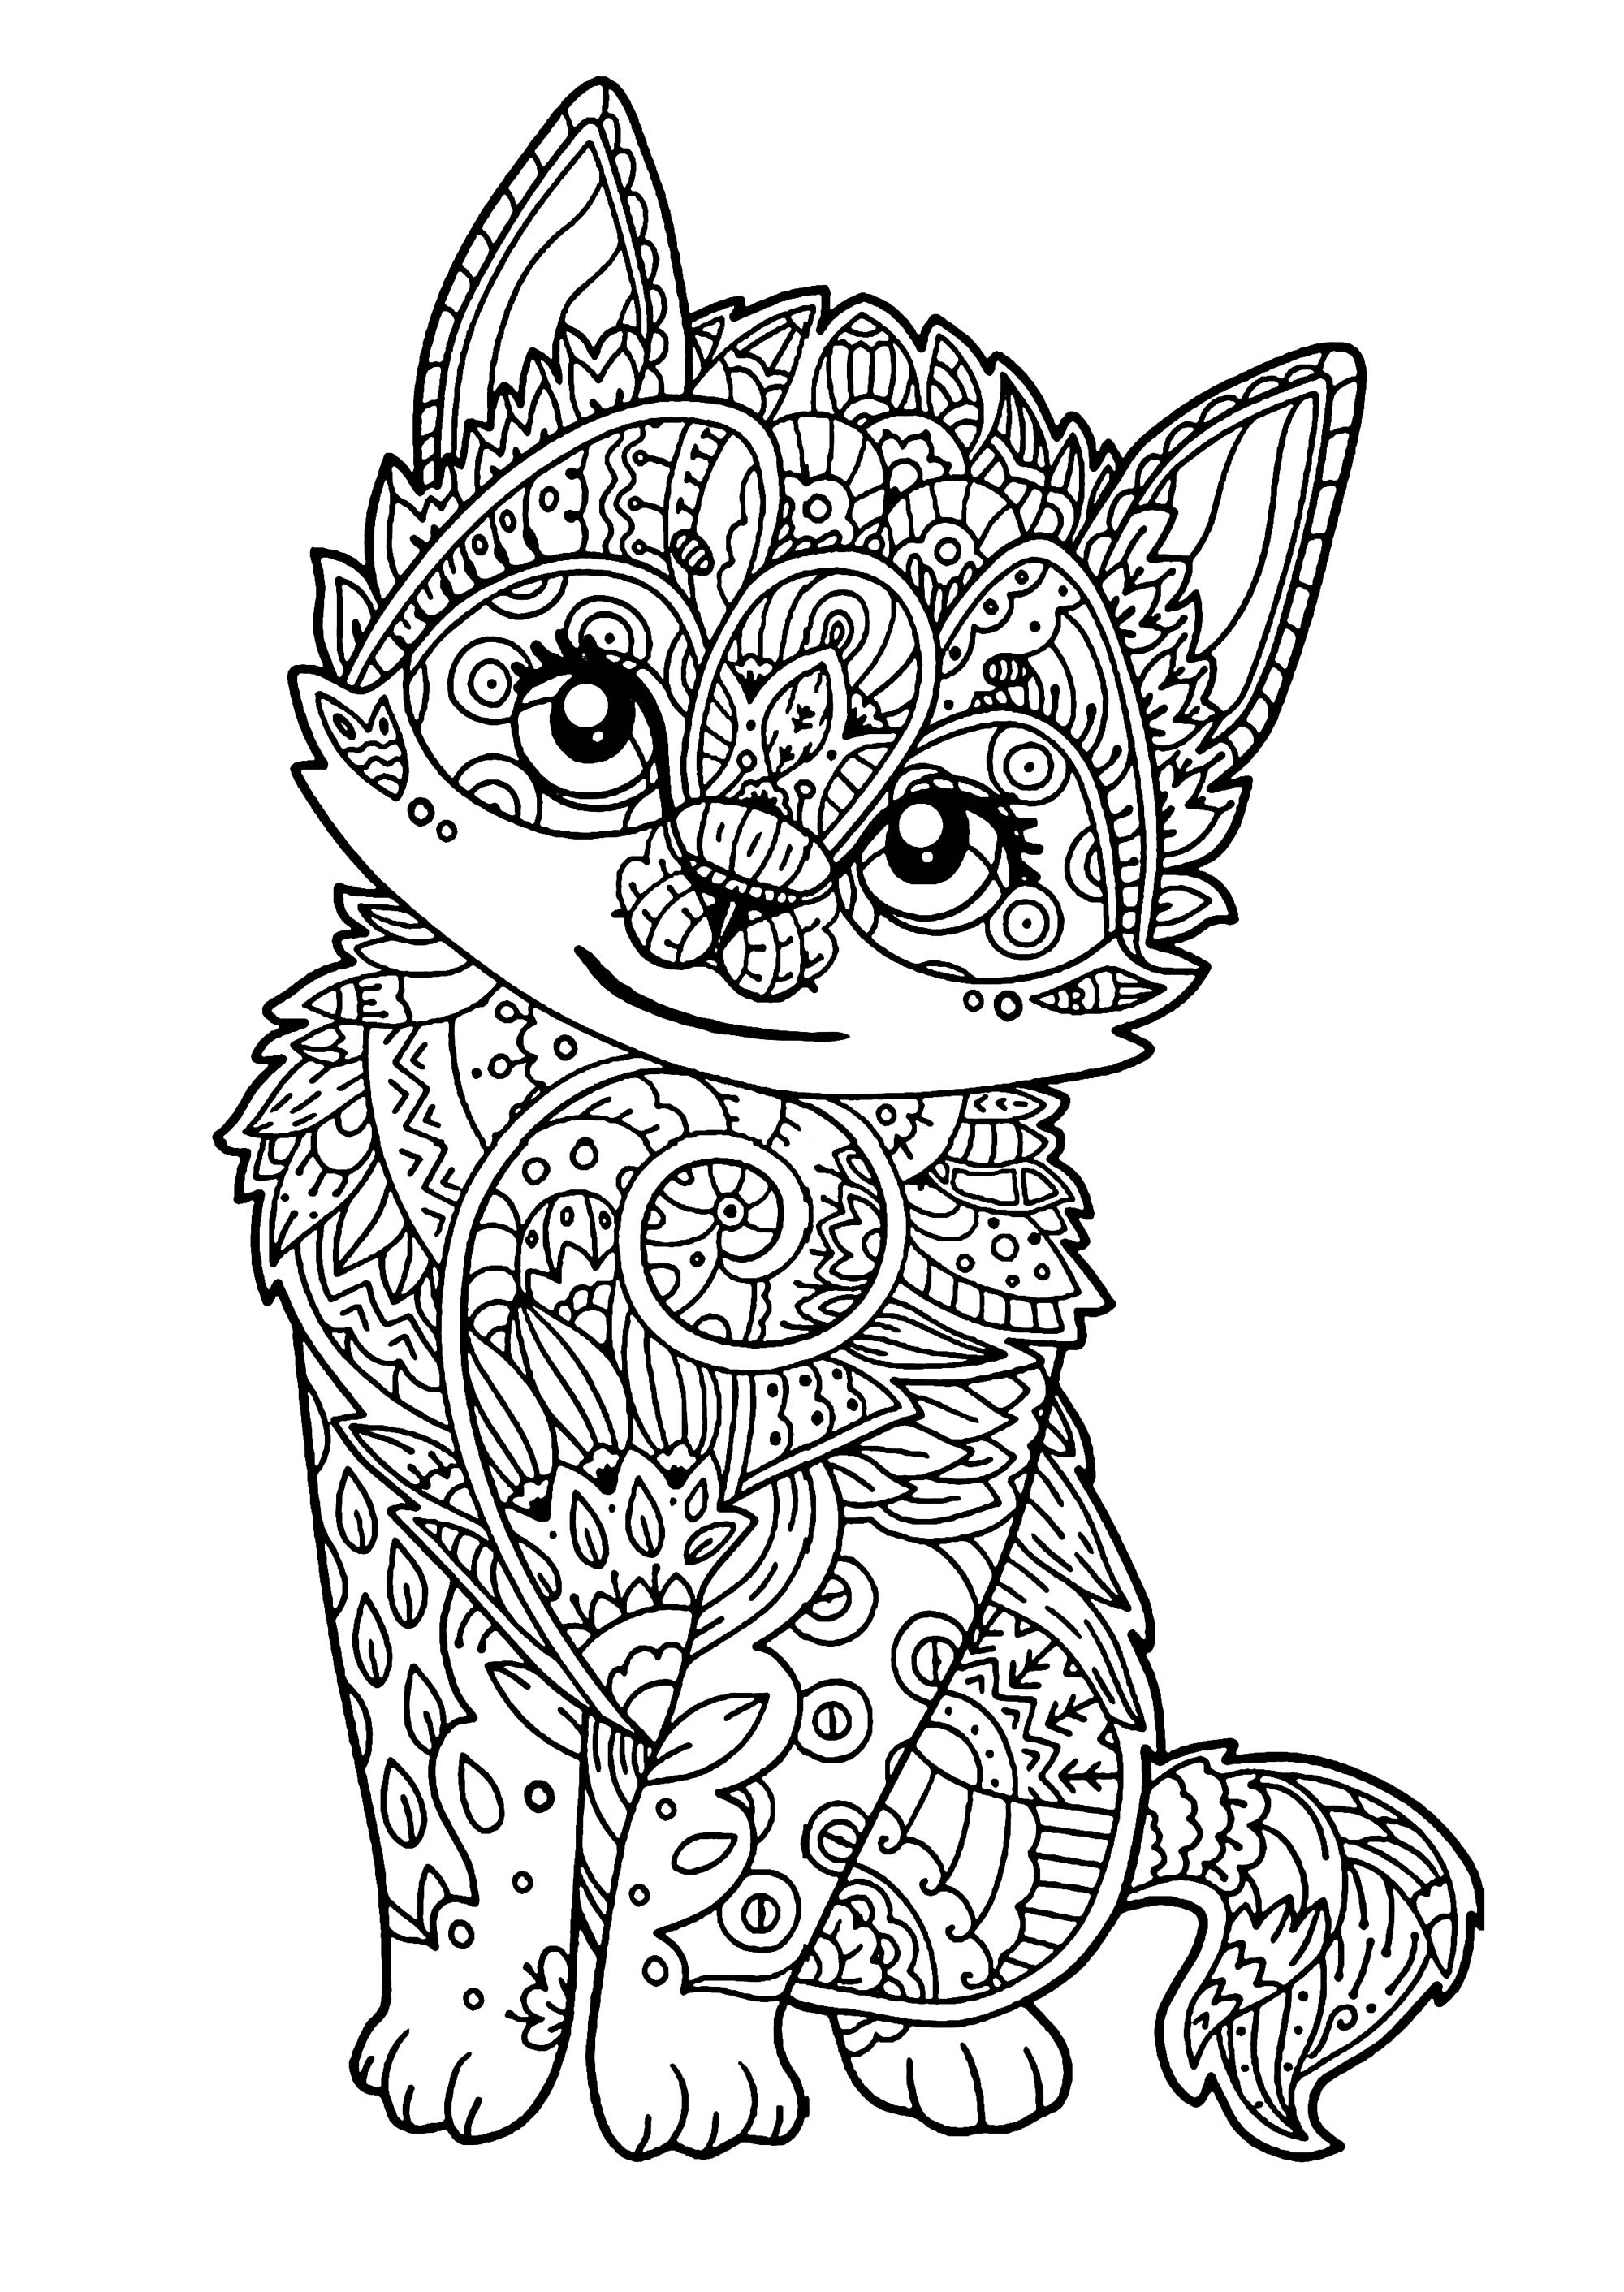 Cat for kids : Little kitten - Cats Kids Coloring Pages